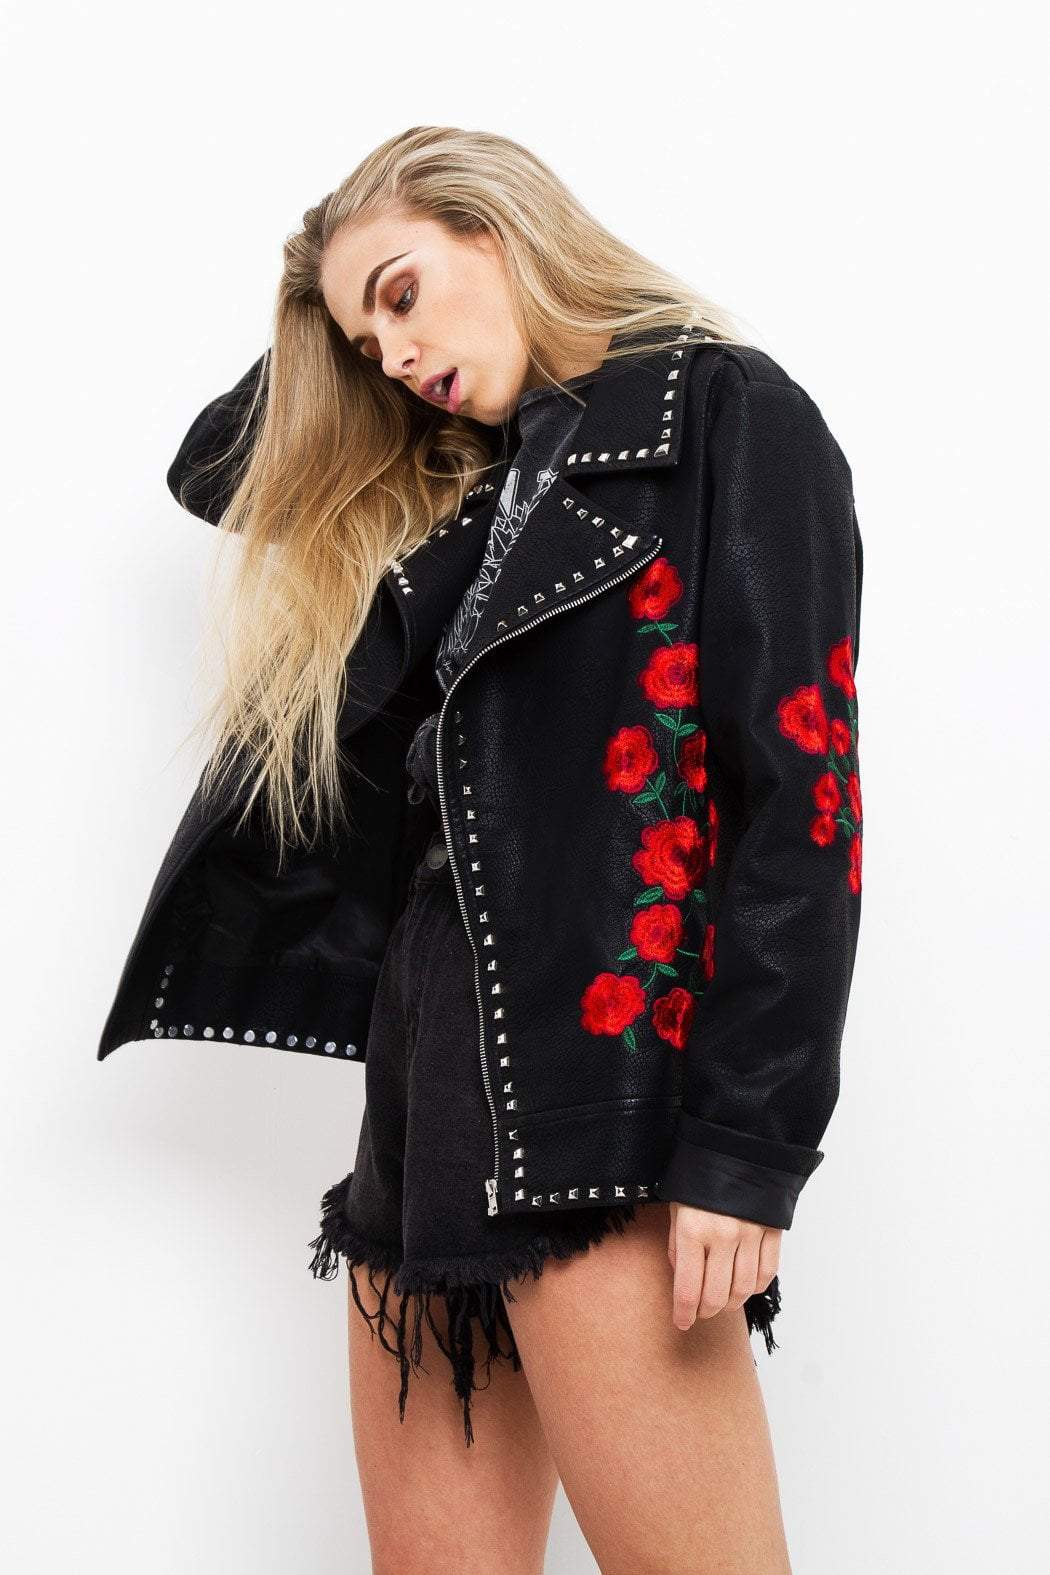 Roses Are Red Embroidered & Studded PU Jacket - Liquor N Poker LIQUOR N POKER